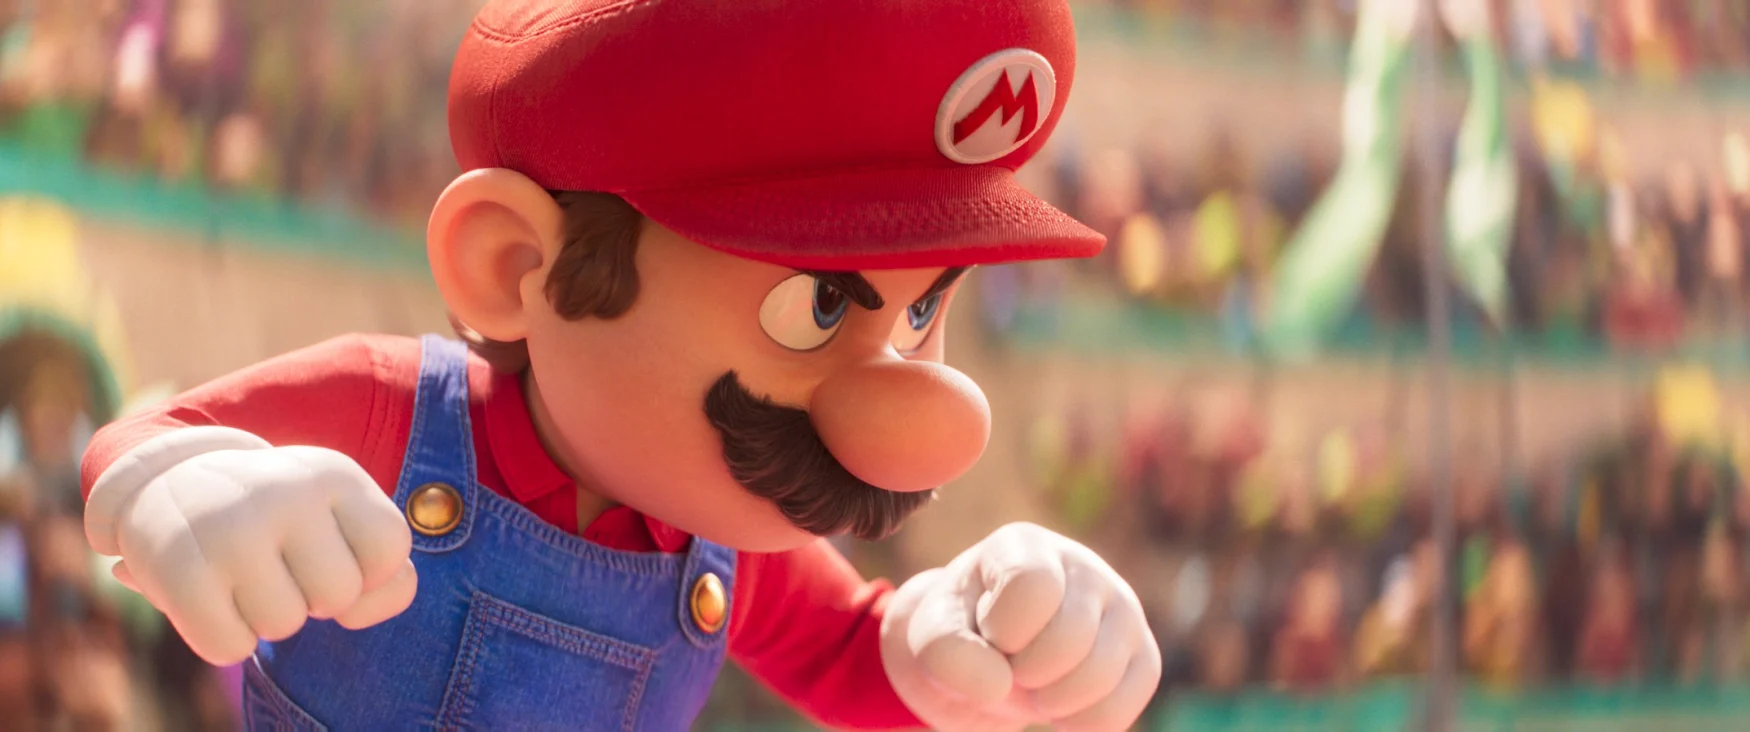 Mario gearing up for action in The Super Mario Bros. Movie